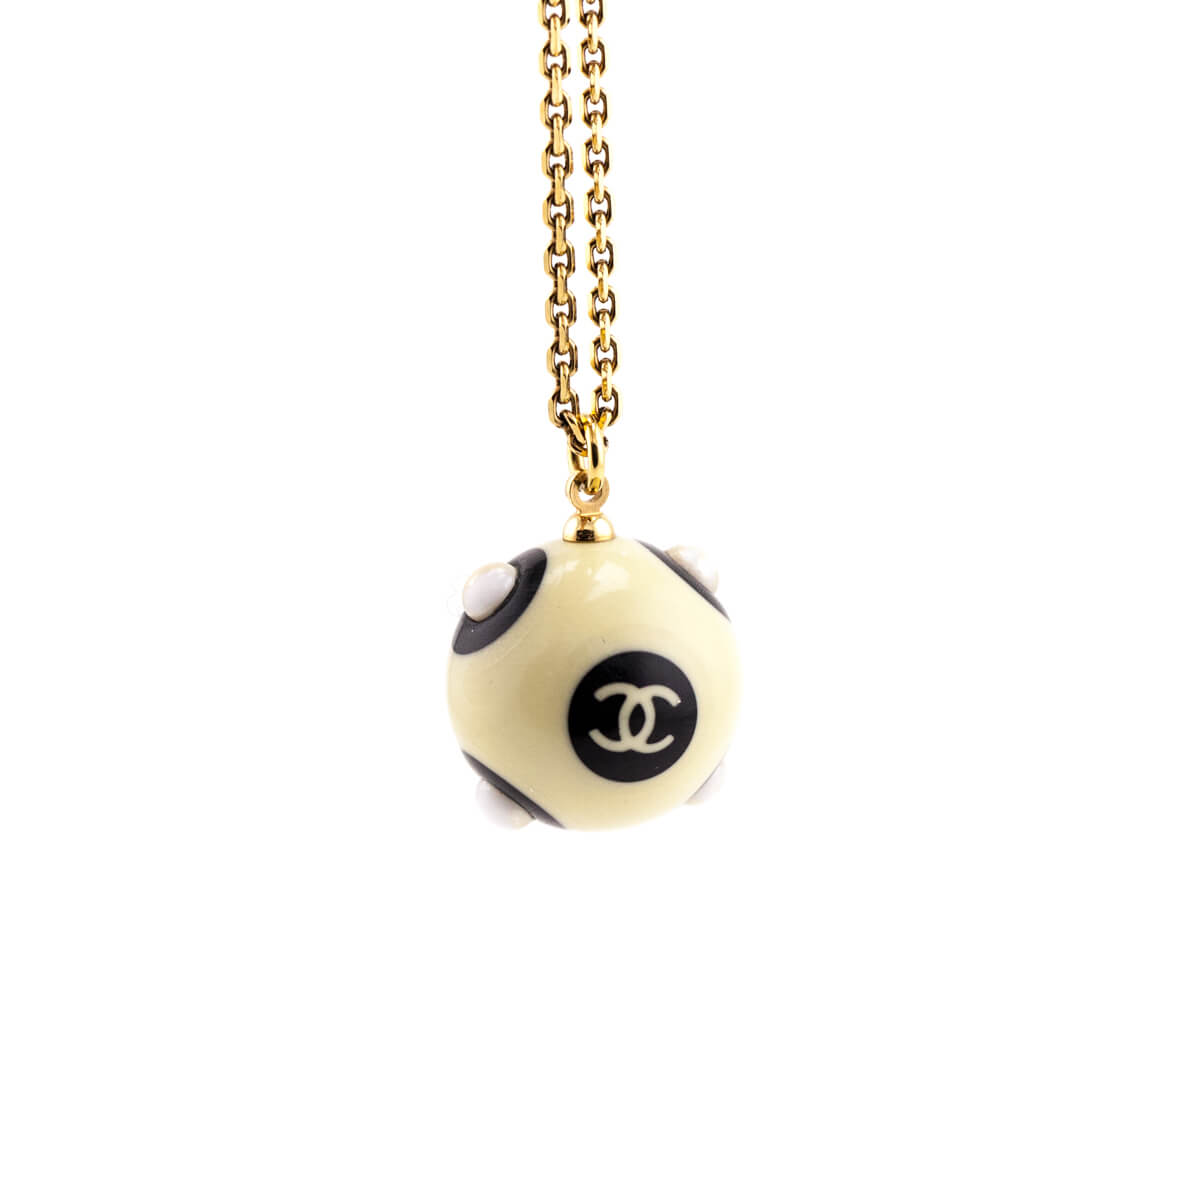 Chanel Resin CC Bead Pendant Necklace - Love that Bag etc - Preowned Authentic Designer Handbags & Preloved Fashions